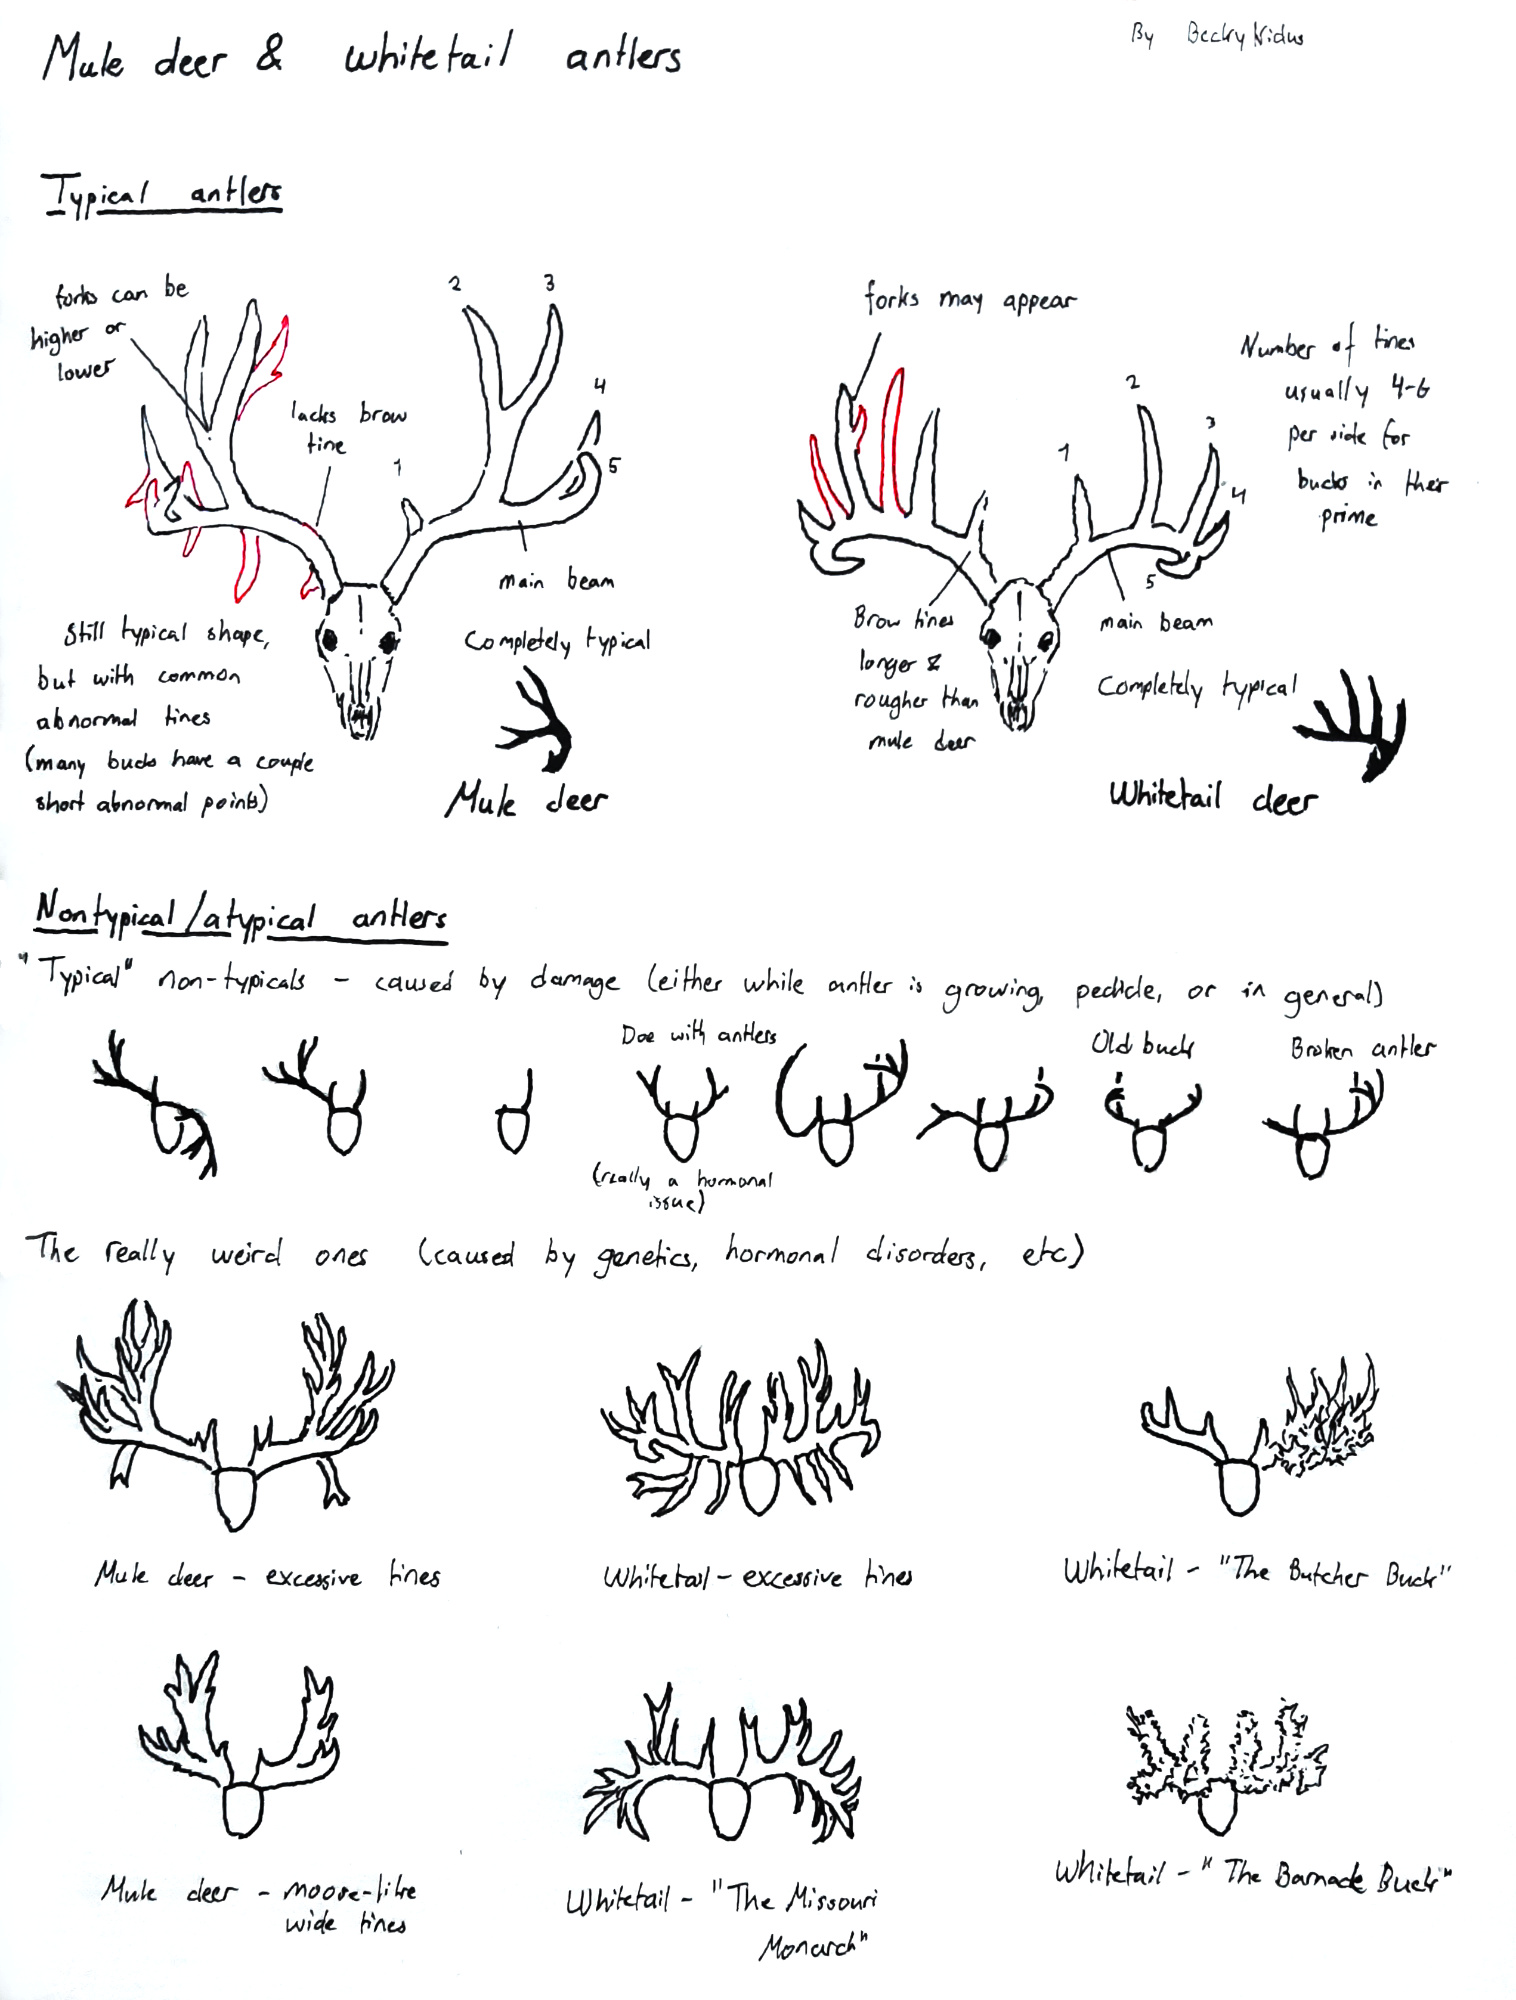 How to draw animal ears by BeckyKidus on DeviantArt